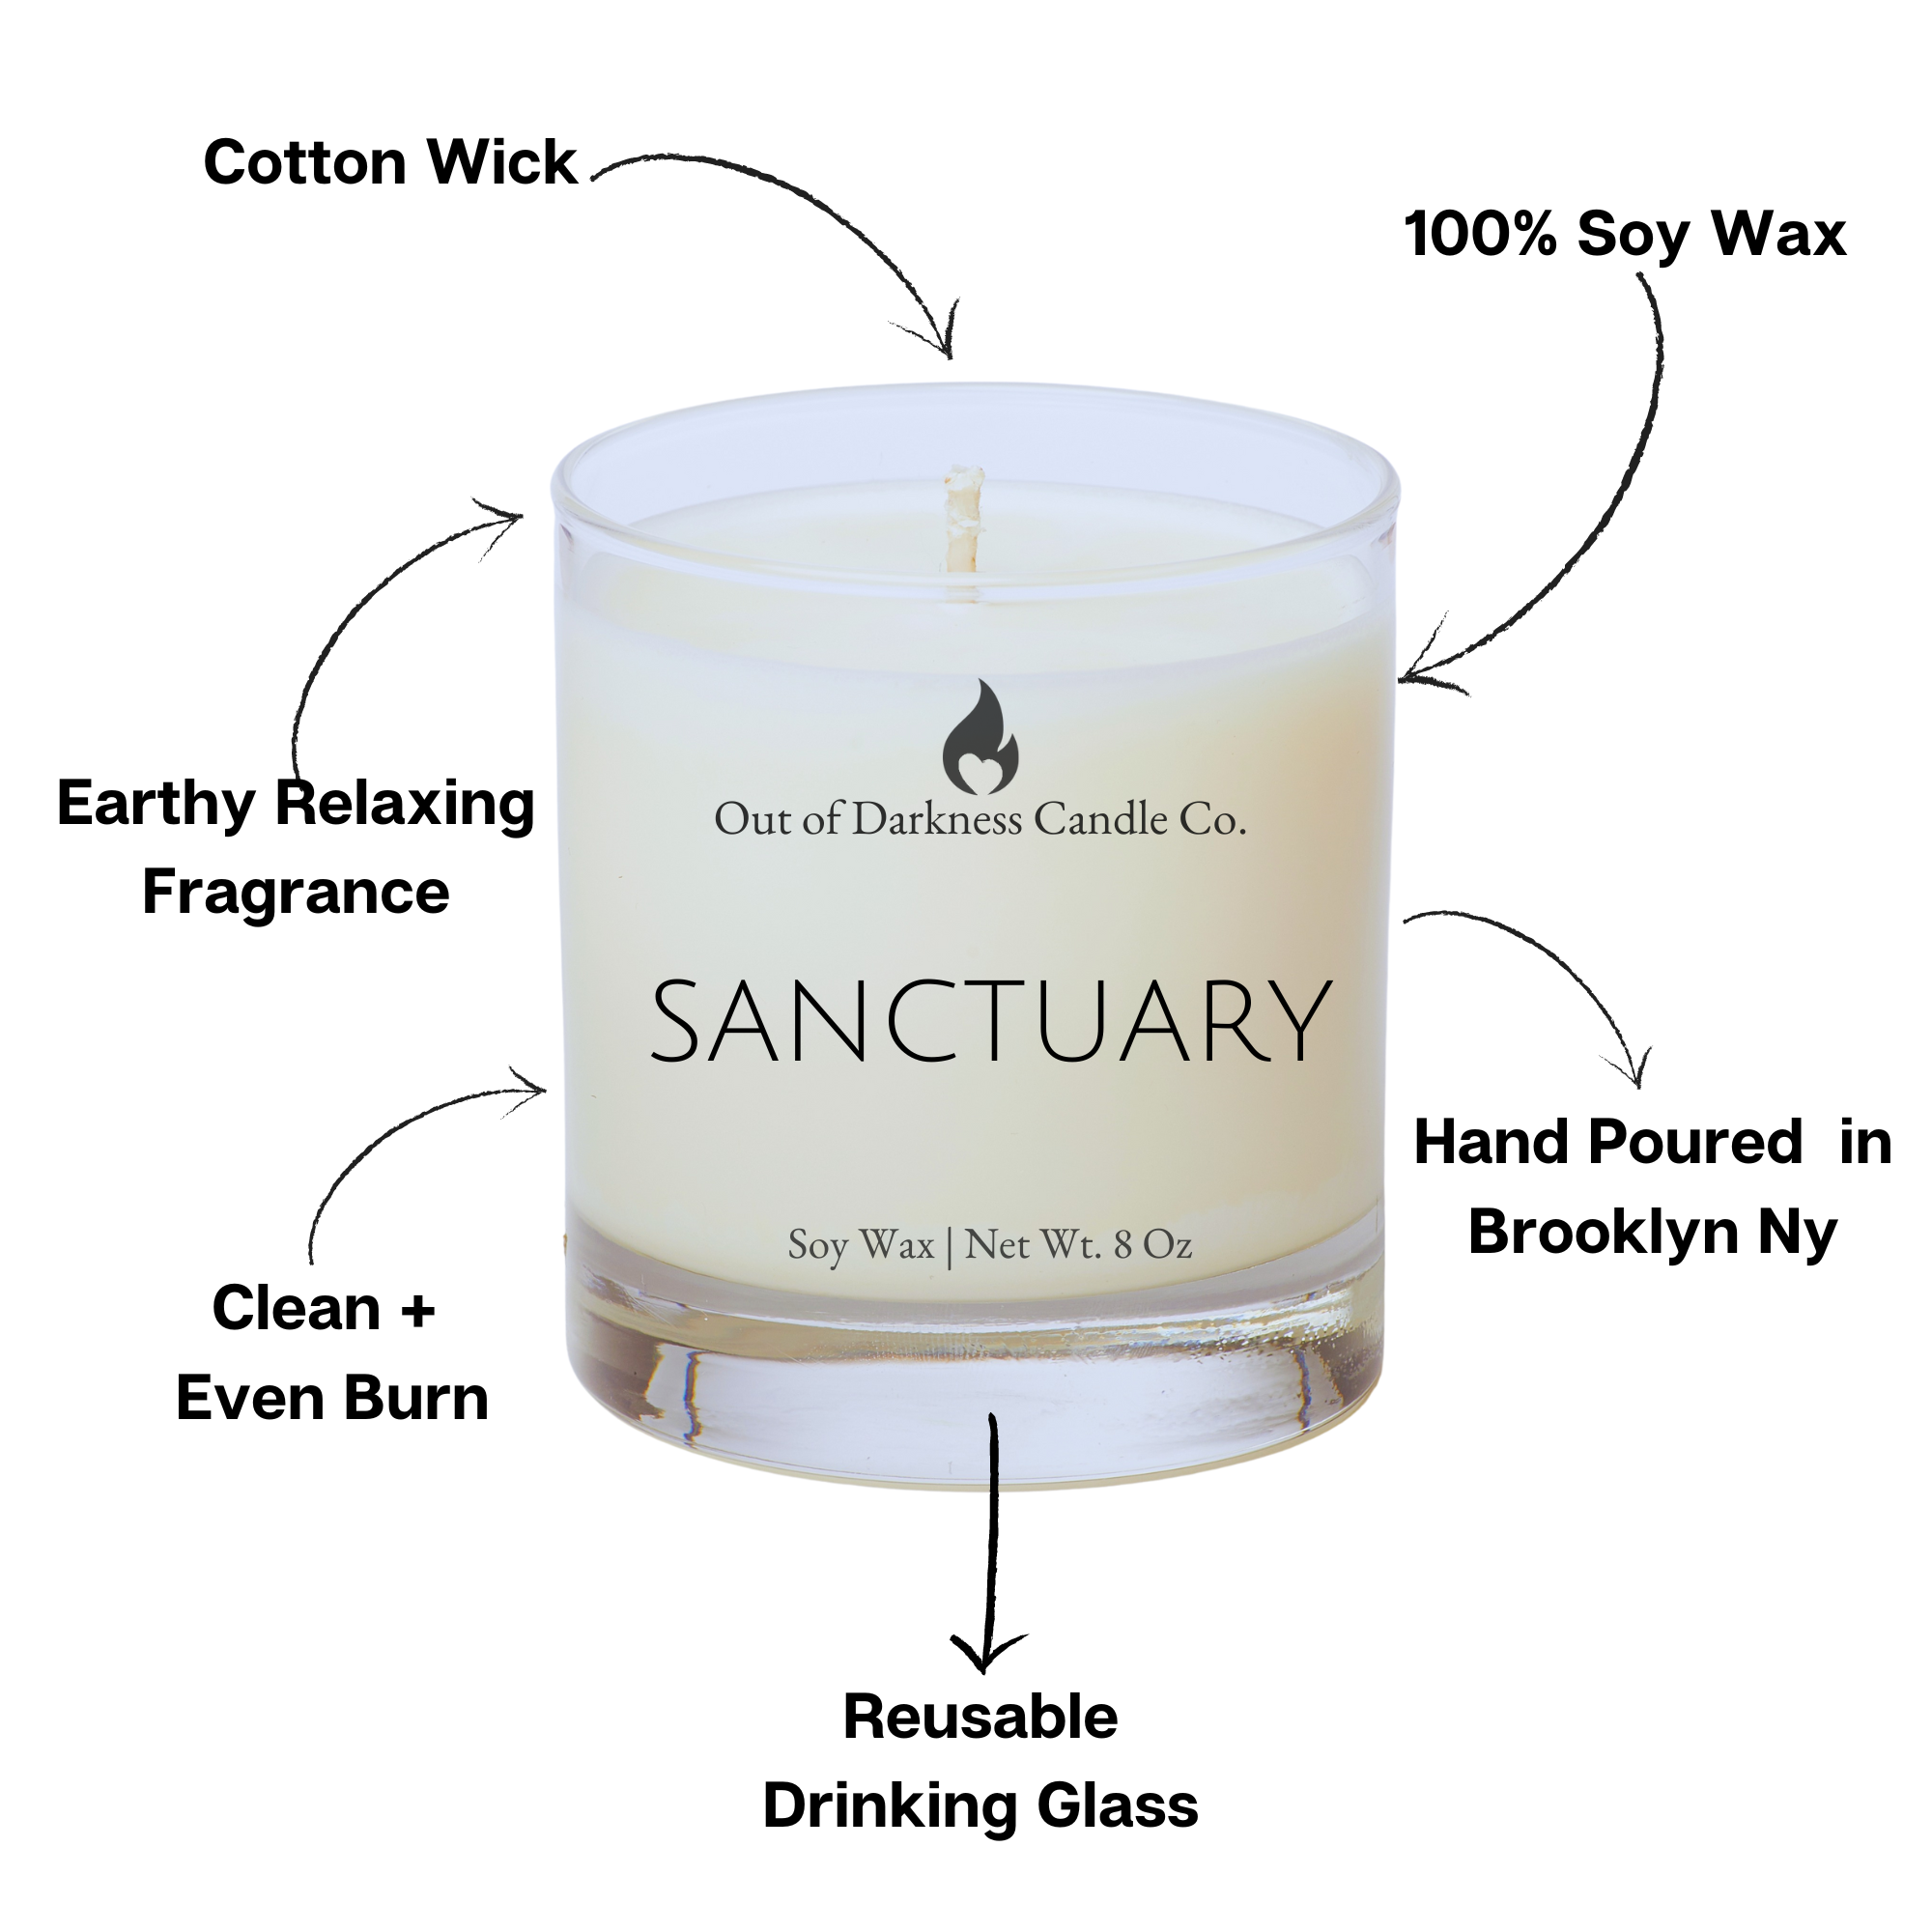 Clear Glass Jar 8 oz Soy Candle that has a black flame company logo on the top- Out of Darkness Candle Co right beneath it In larger letters centered in the middle it states Sanctuary in all caps and below that Soy Wax Net Wt. 8 oz Around the candle are arrows that describe what is in the candle- 100% Soy Wax, Cotton Wick, Hand Poured in Brooklyn NY Resuable Drinking Glass, Clean and Even Burn, earthy relaxing Fragrance